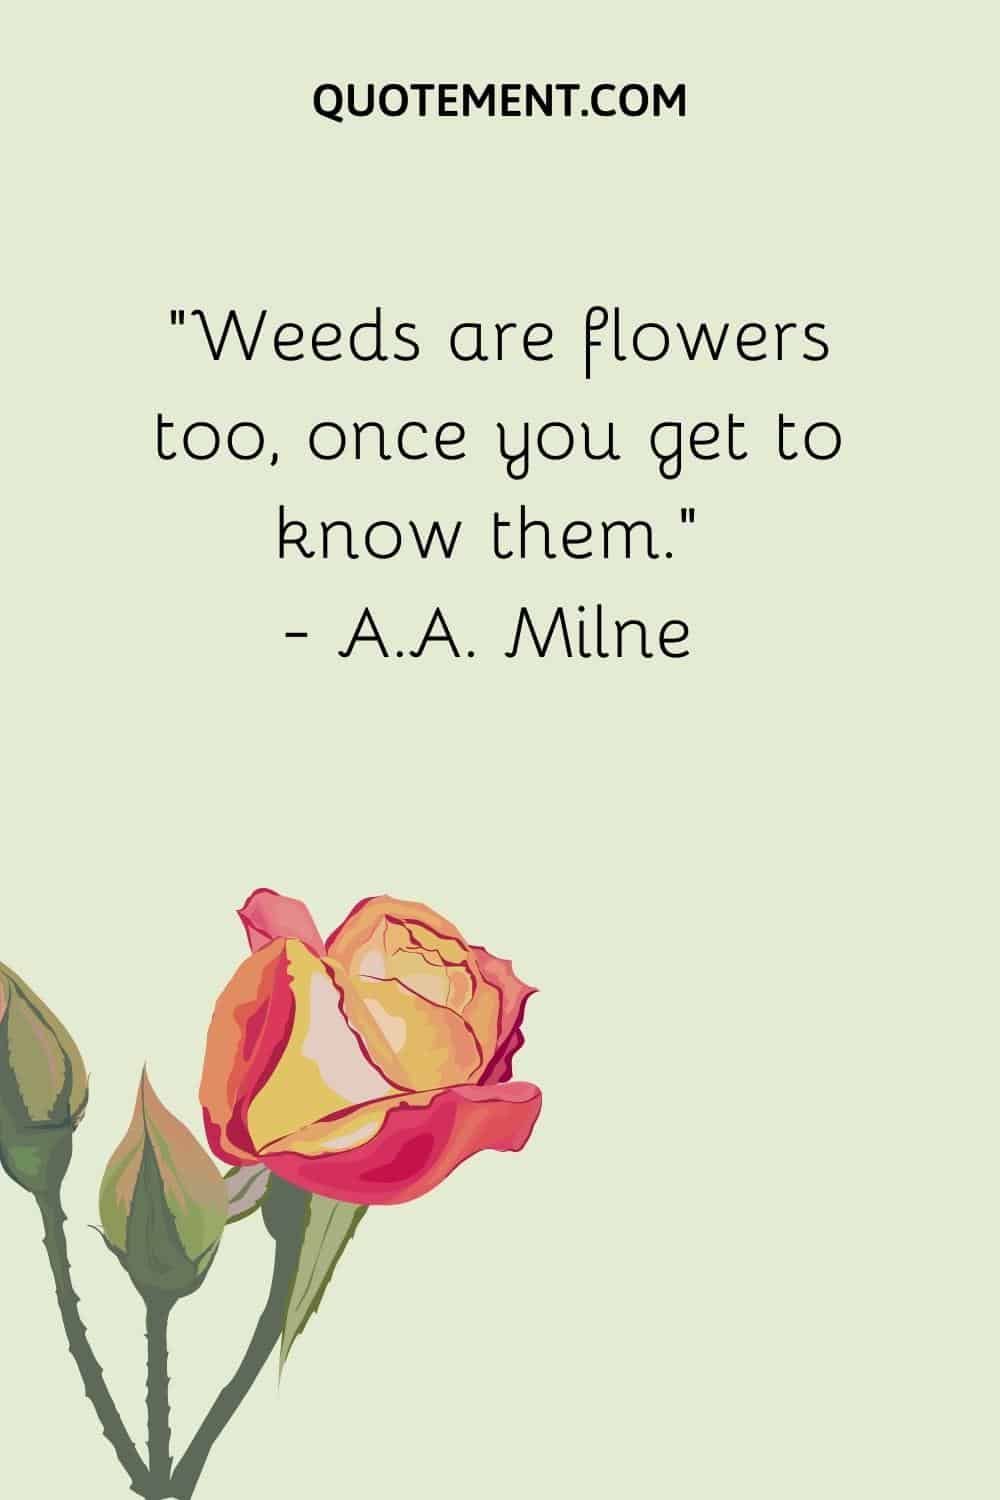 “Weeds are flowers too, once you get to know them.” — A.A. Milne